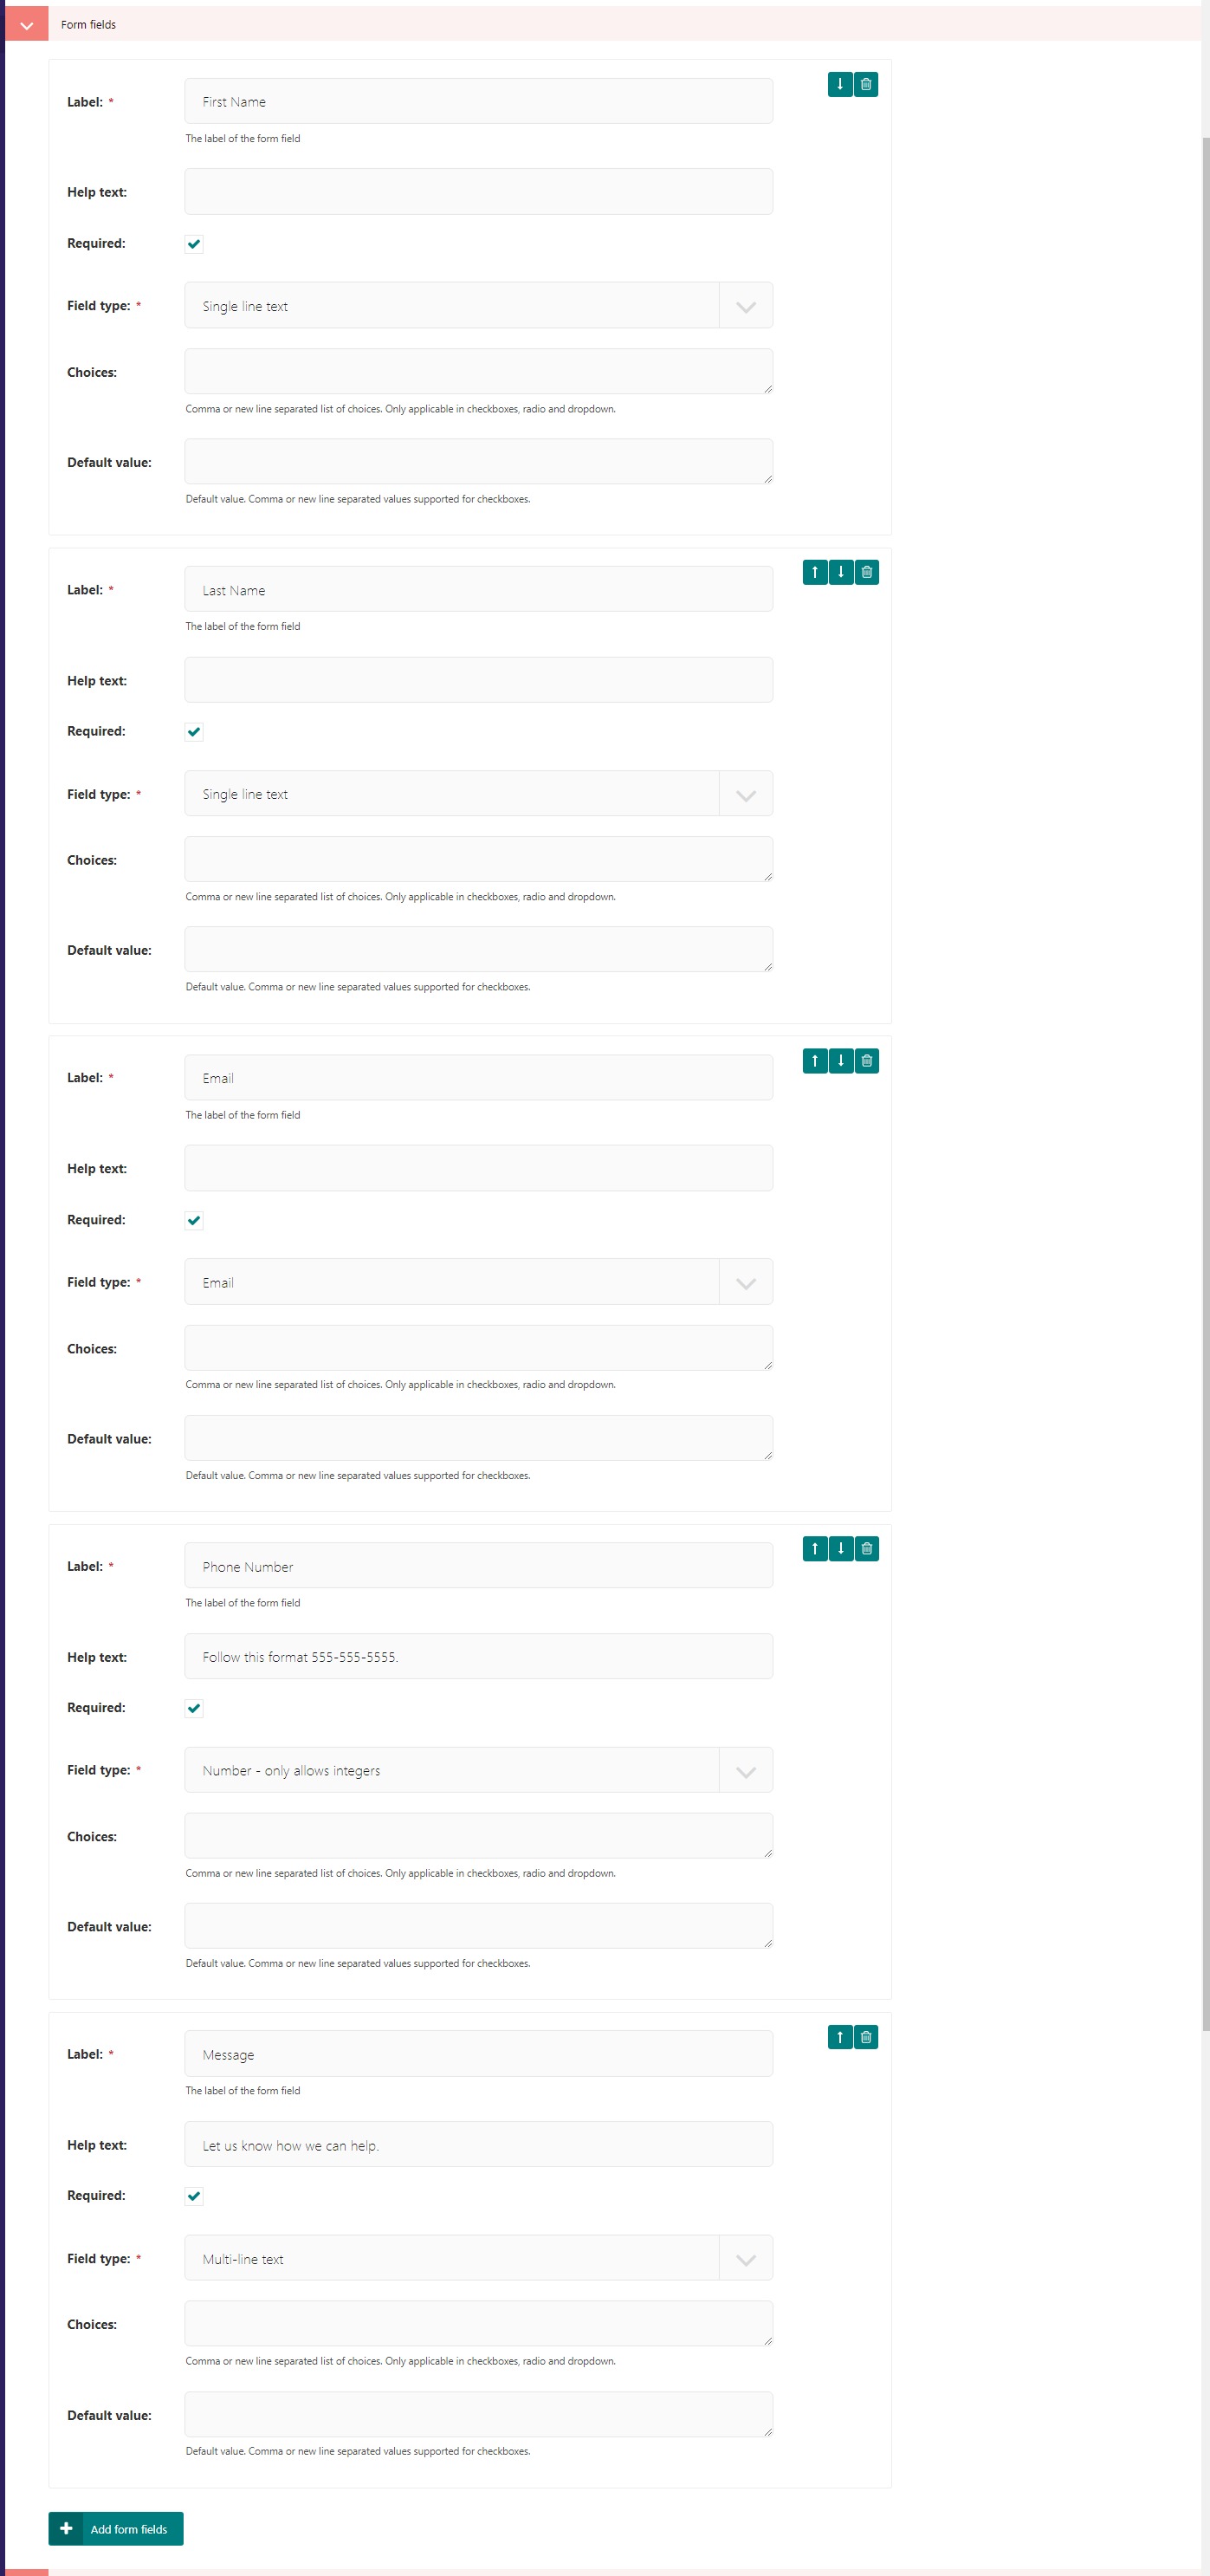 The form fields on the contact us page